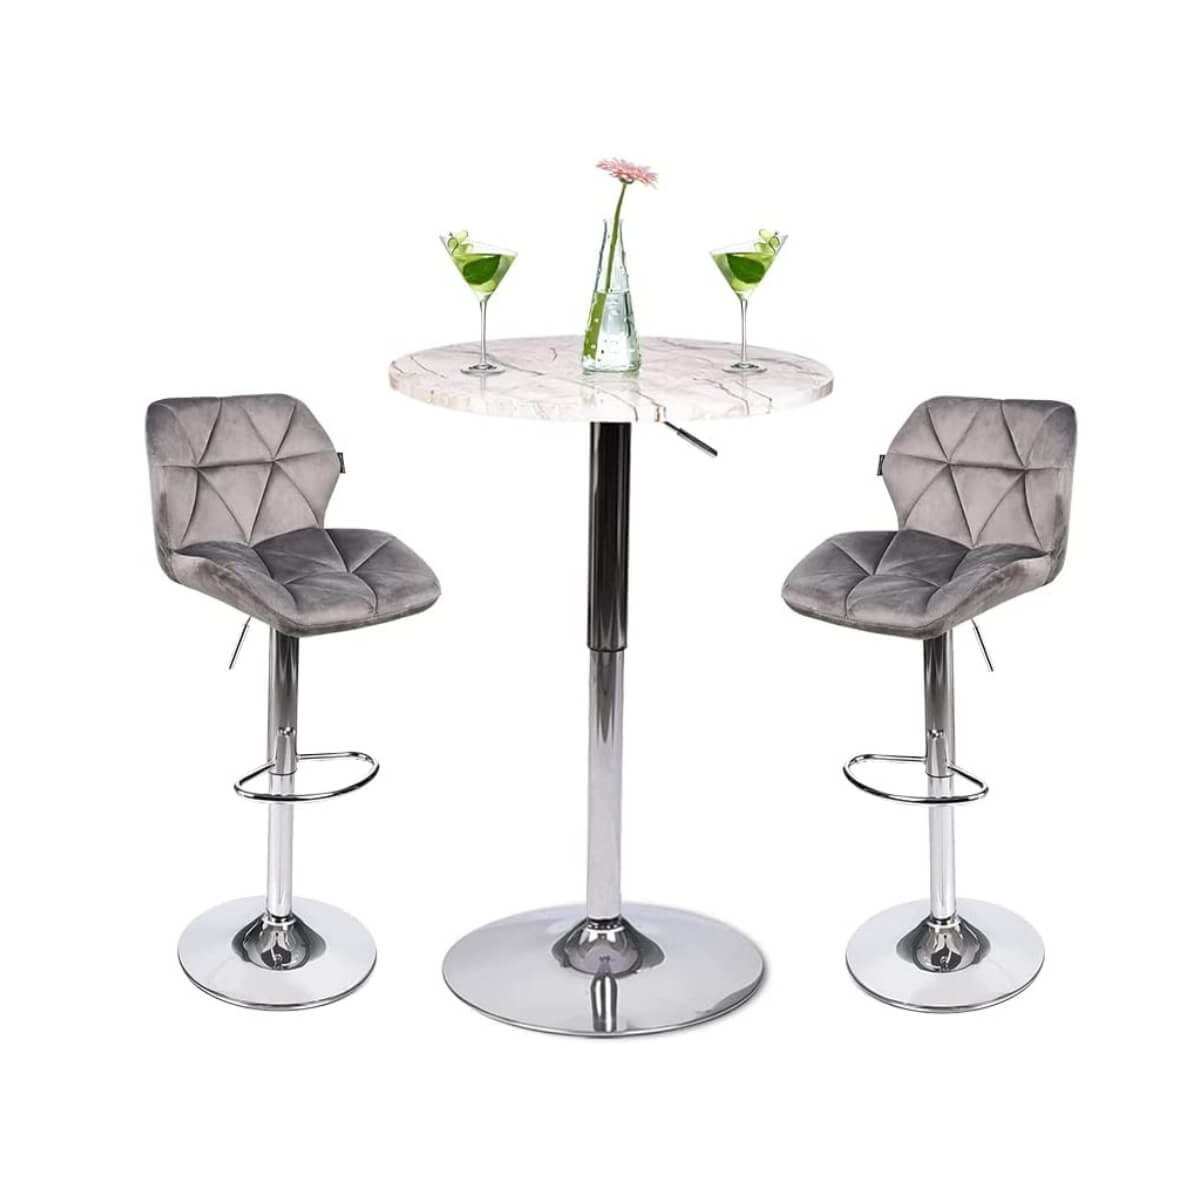 Marble table with faux leather silver bar stools ow005